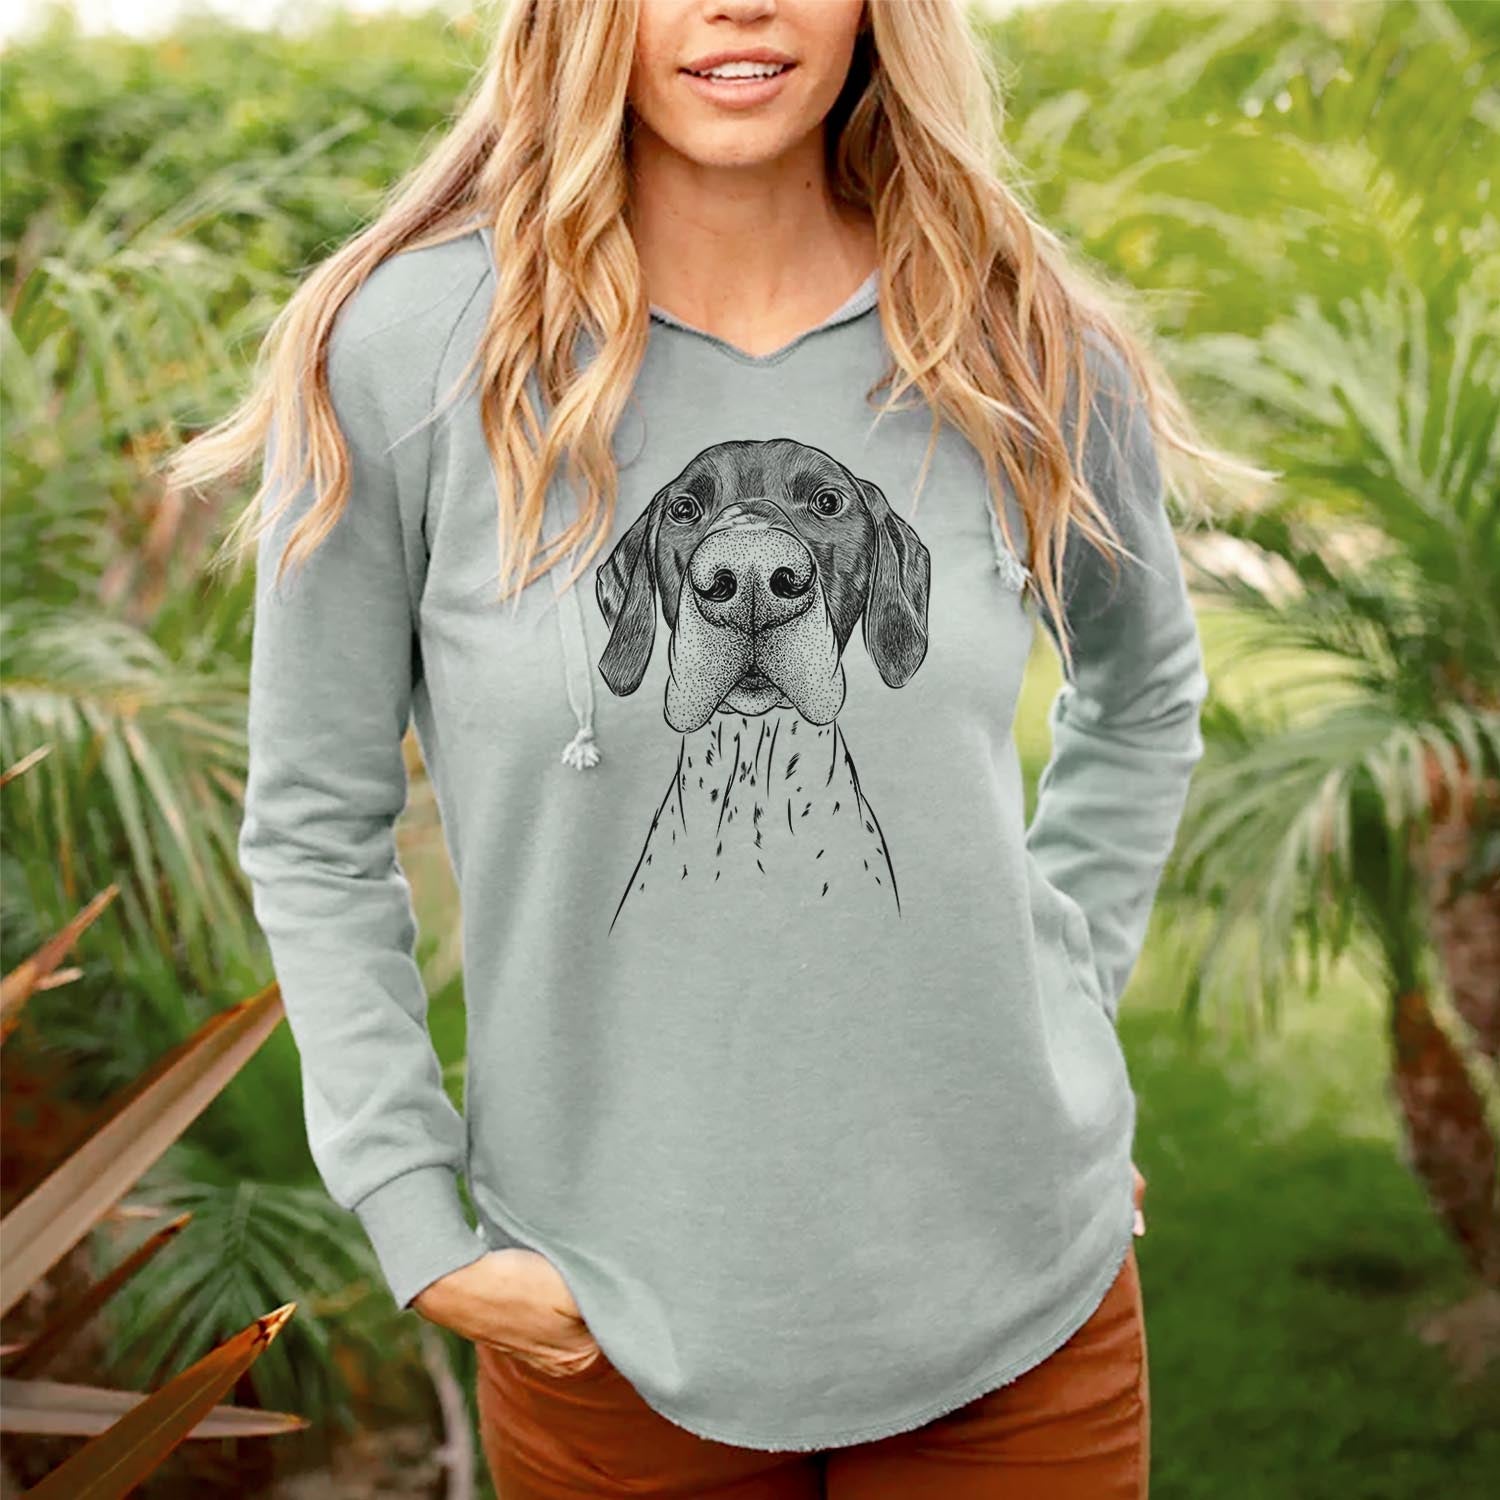 Booze the German Shorthaired Pointer - Cali Wave Hooded Sweatshirt